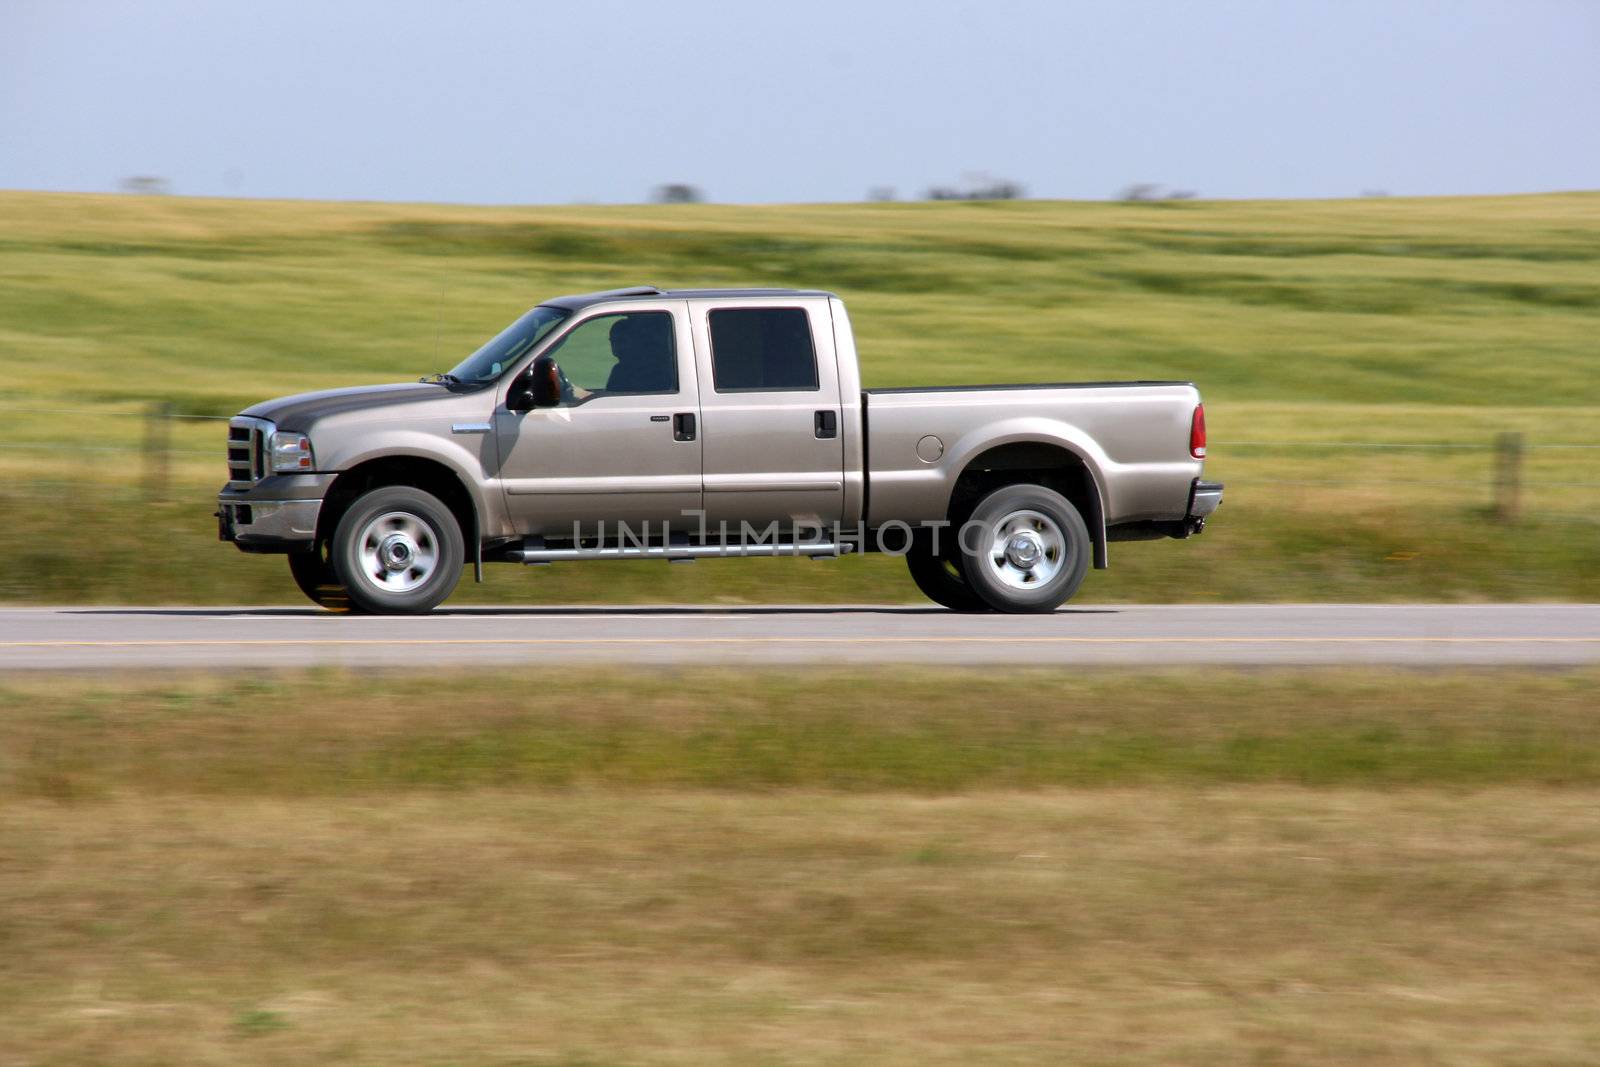 Pick up truck in motion. Speed blur. Road abstract.